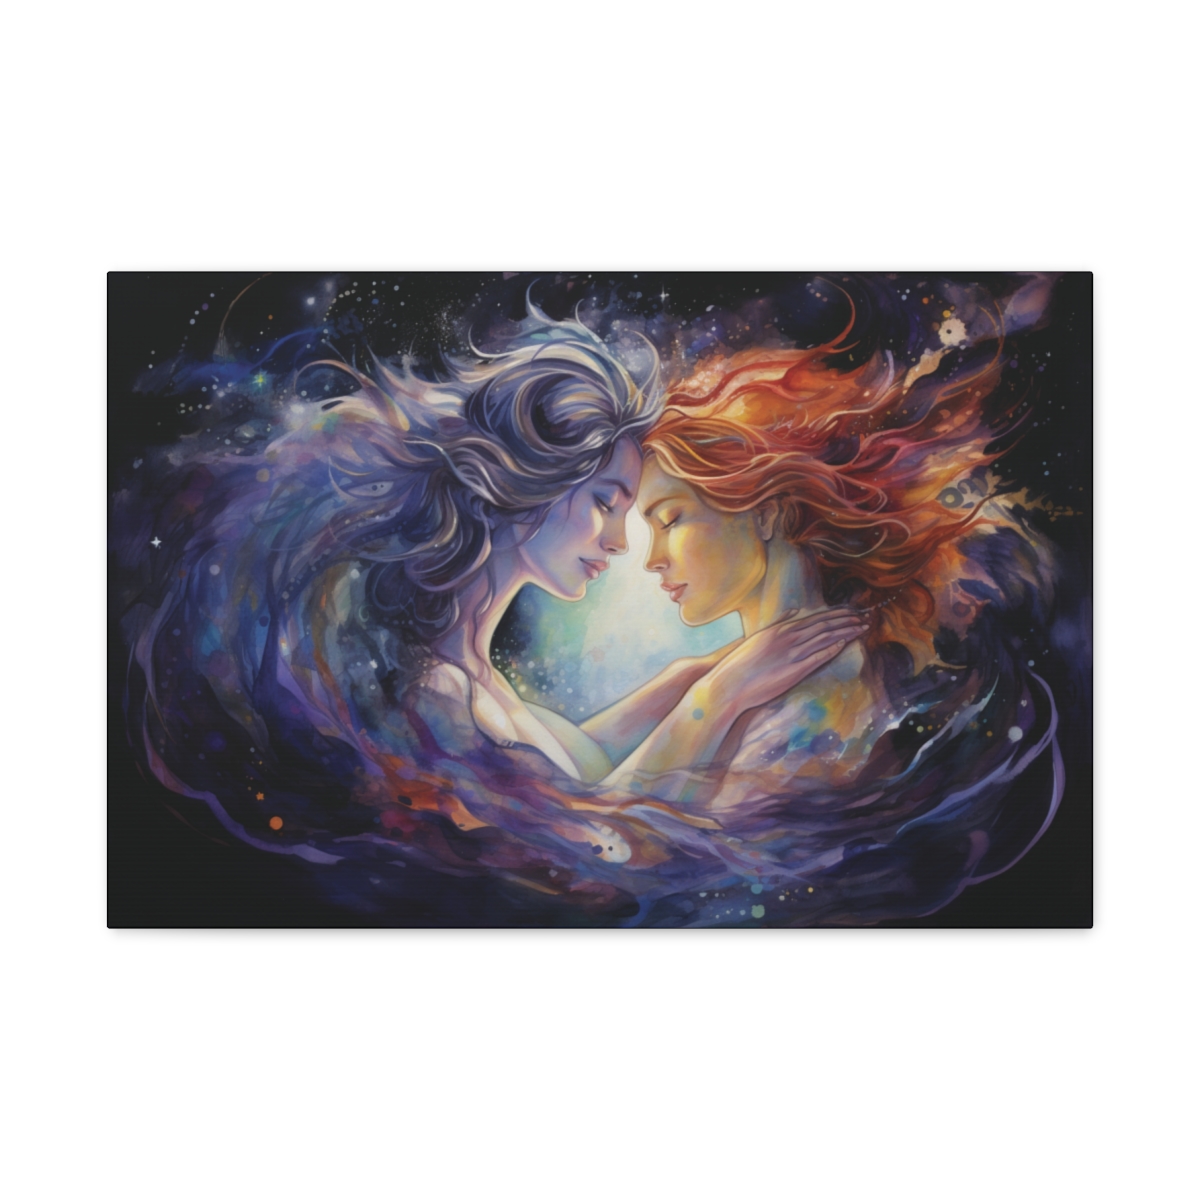 Spiritual Twinflame Art Canvas Print: We Have Loved For Eternity